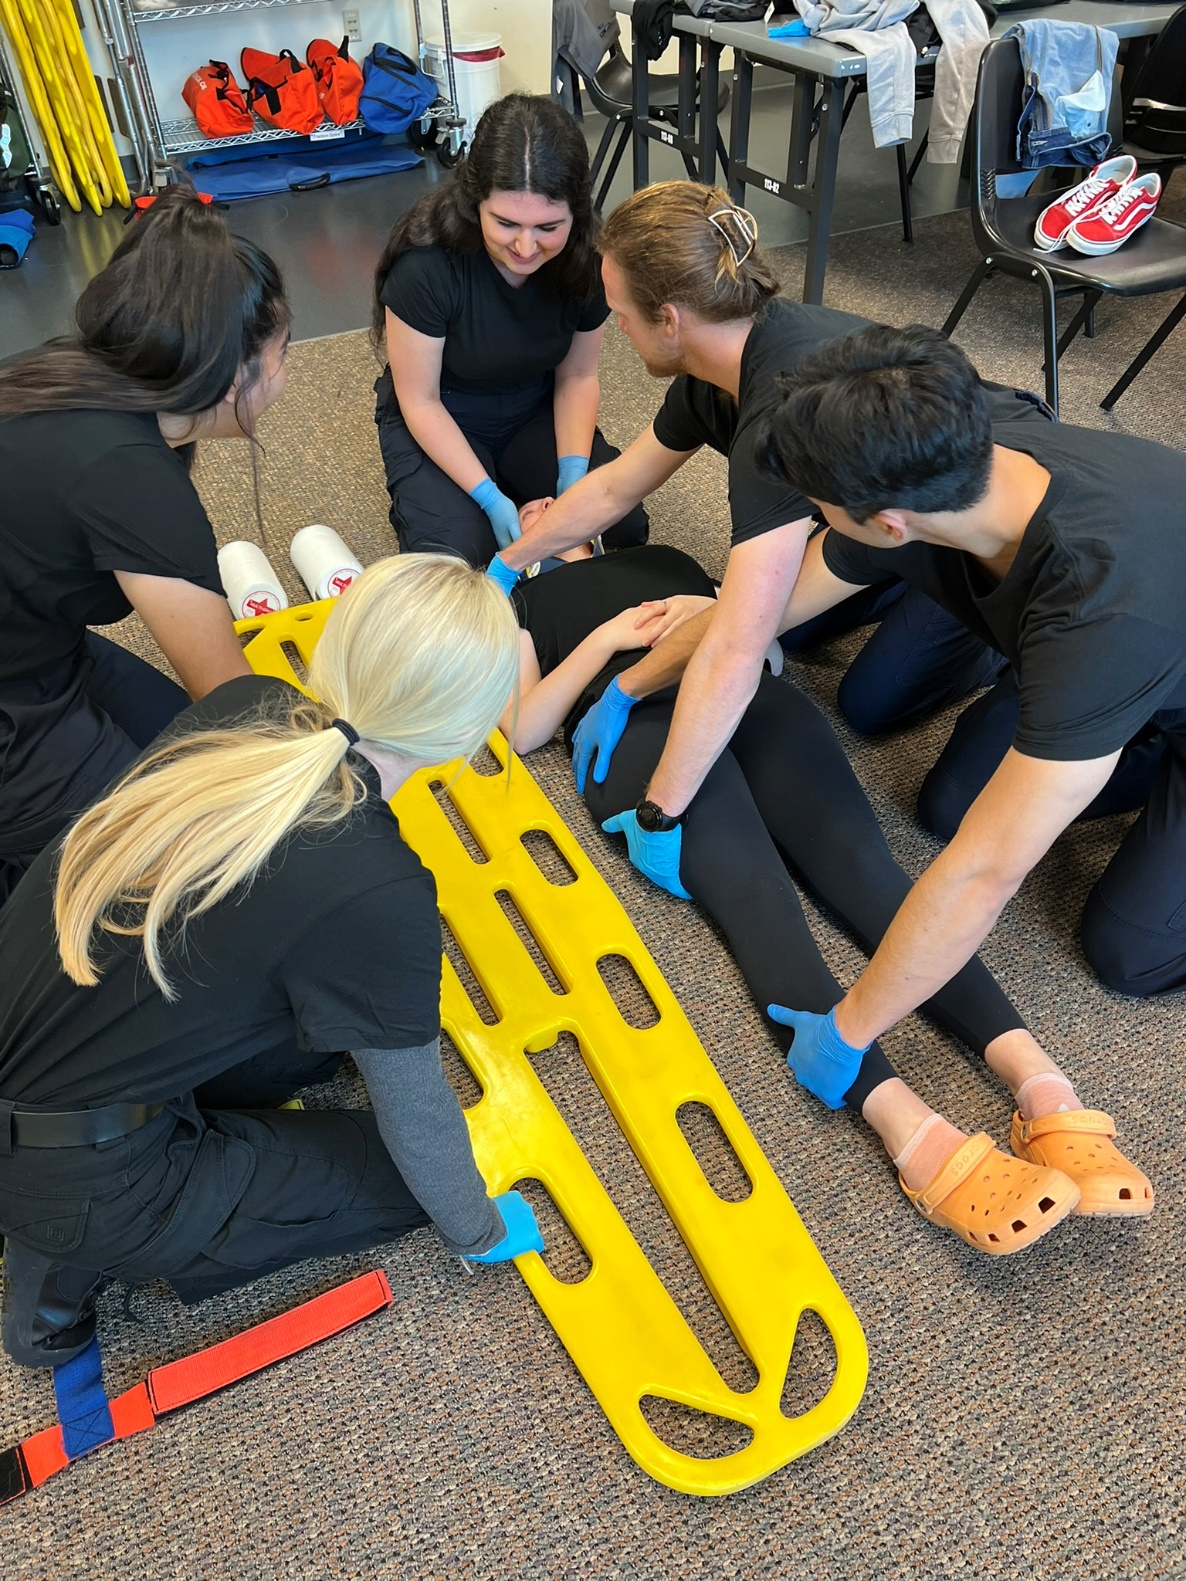 Photo of 6 gloved EMTs. Two EMTs are preparing to logroll supine patient with an EMT at the patient's head holding c-spine stabilization. The two remaining EMTs are preparing to slide backboard under patient.